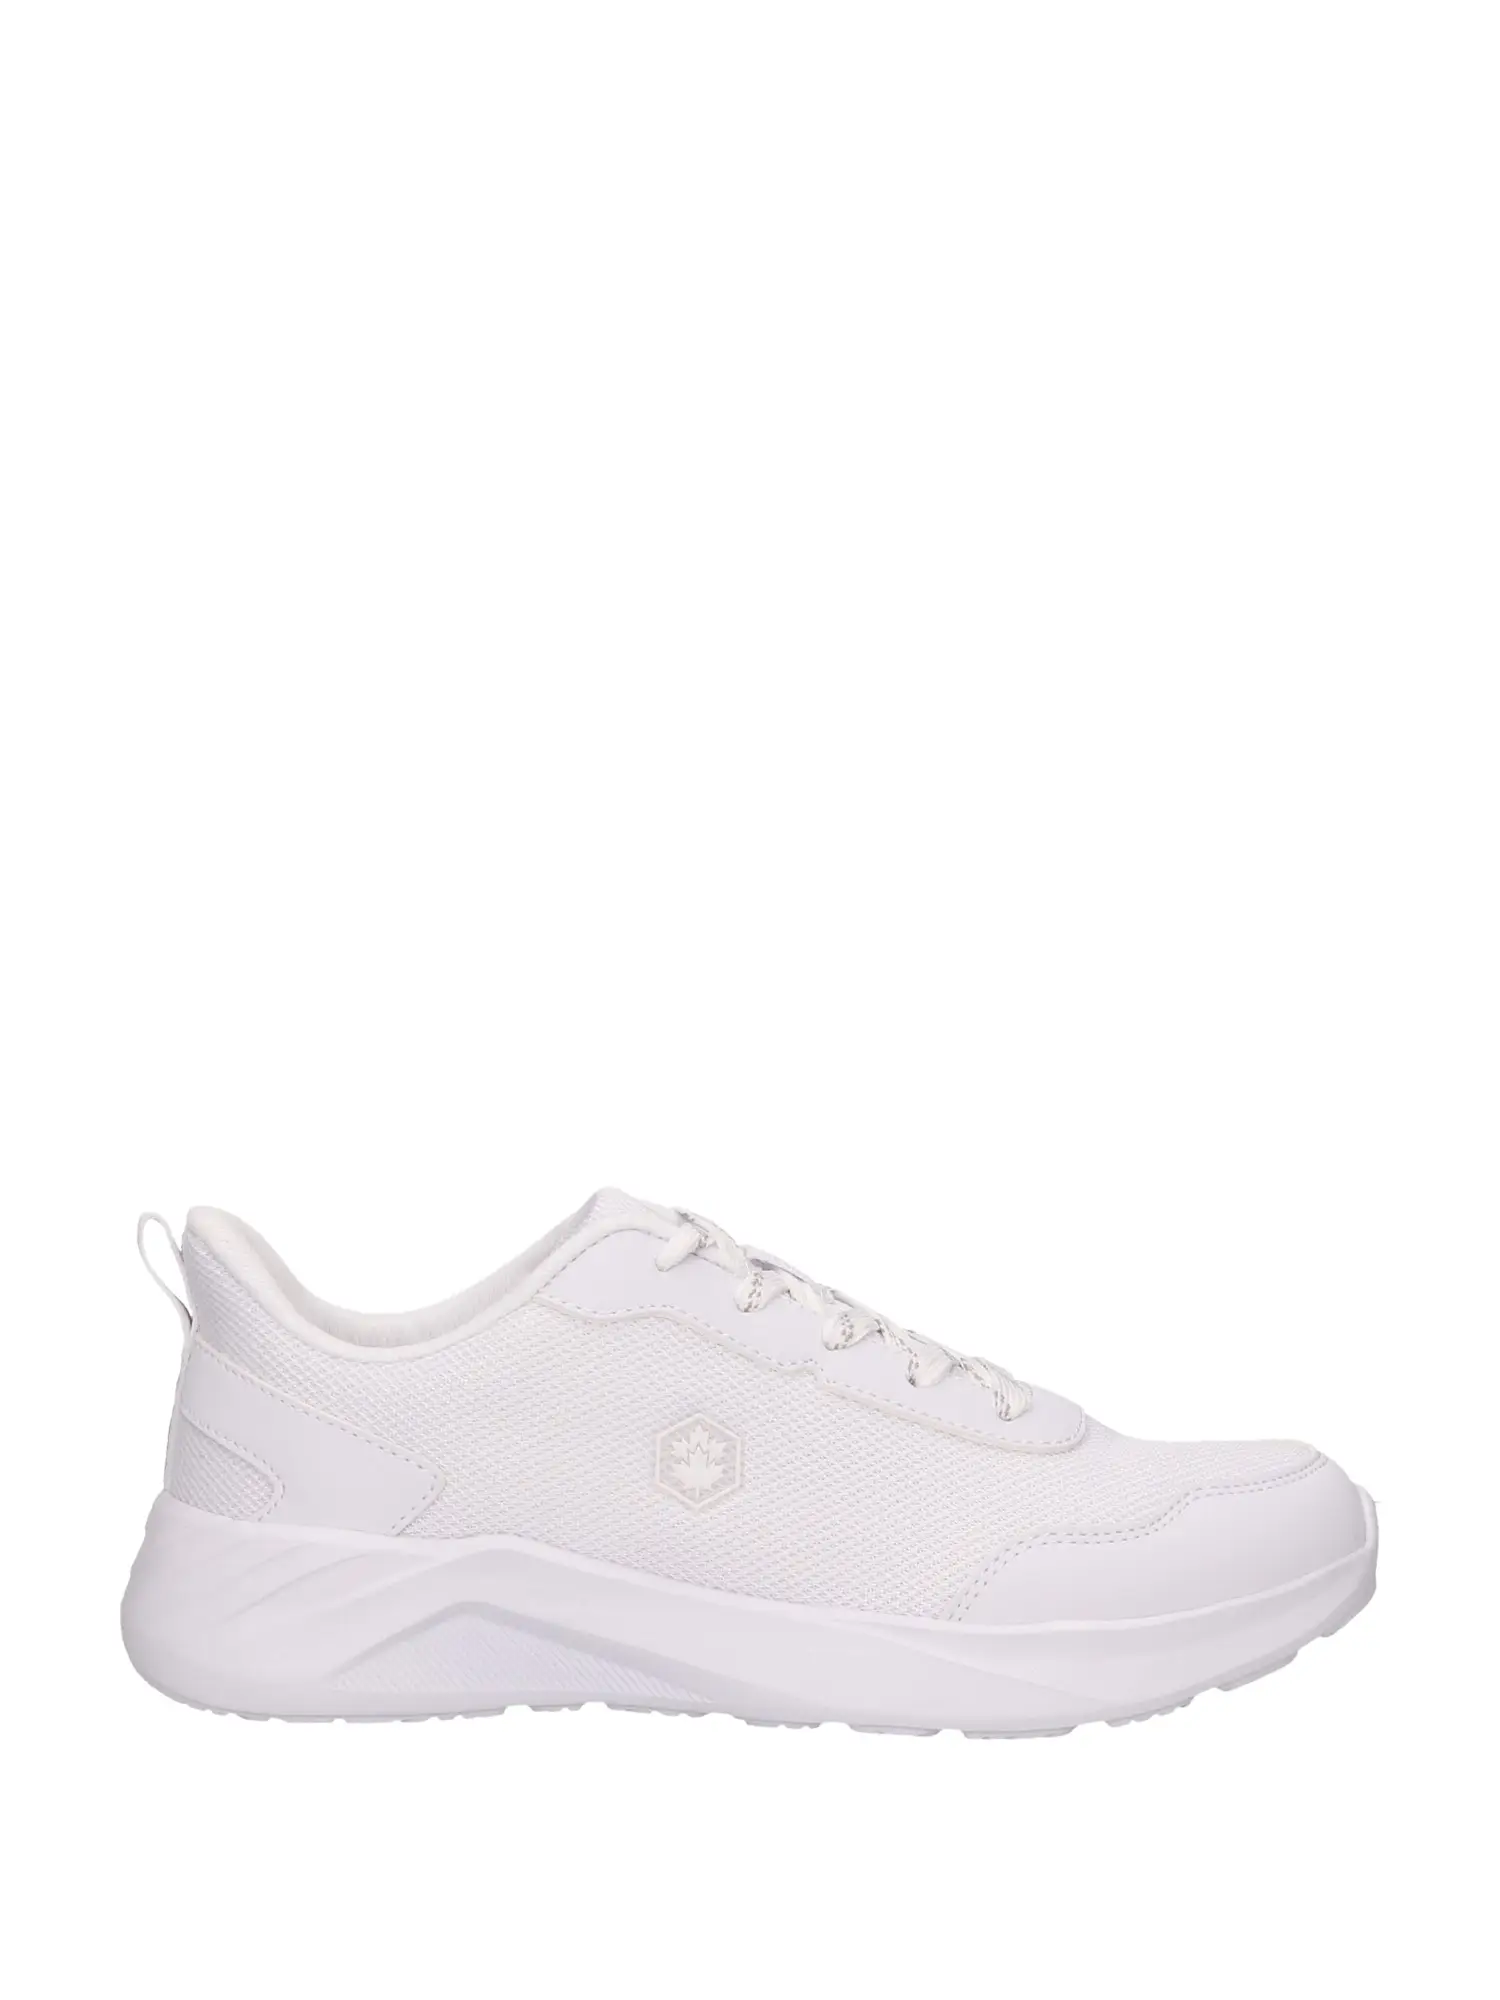 SNEAKERS DONNA - LUMBERJACK - SWH9211-001 S51 - BIANCO, 41